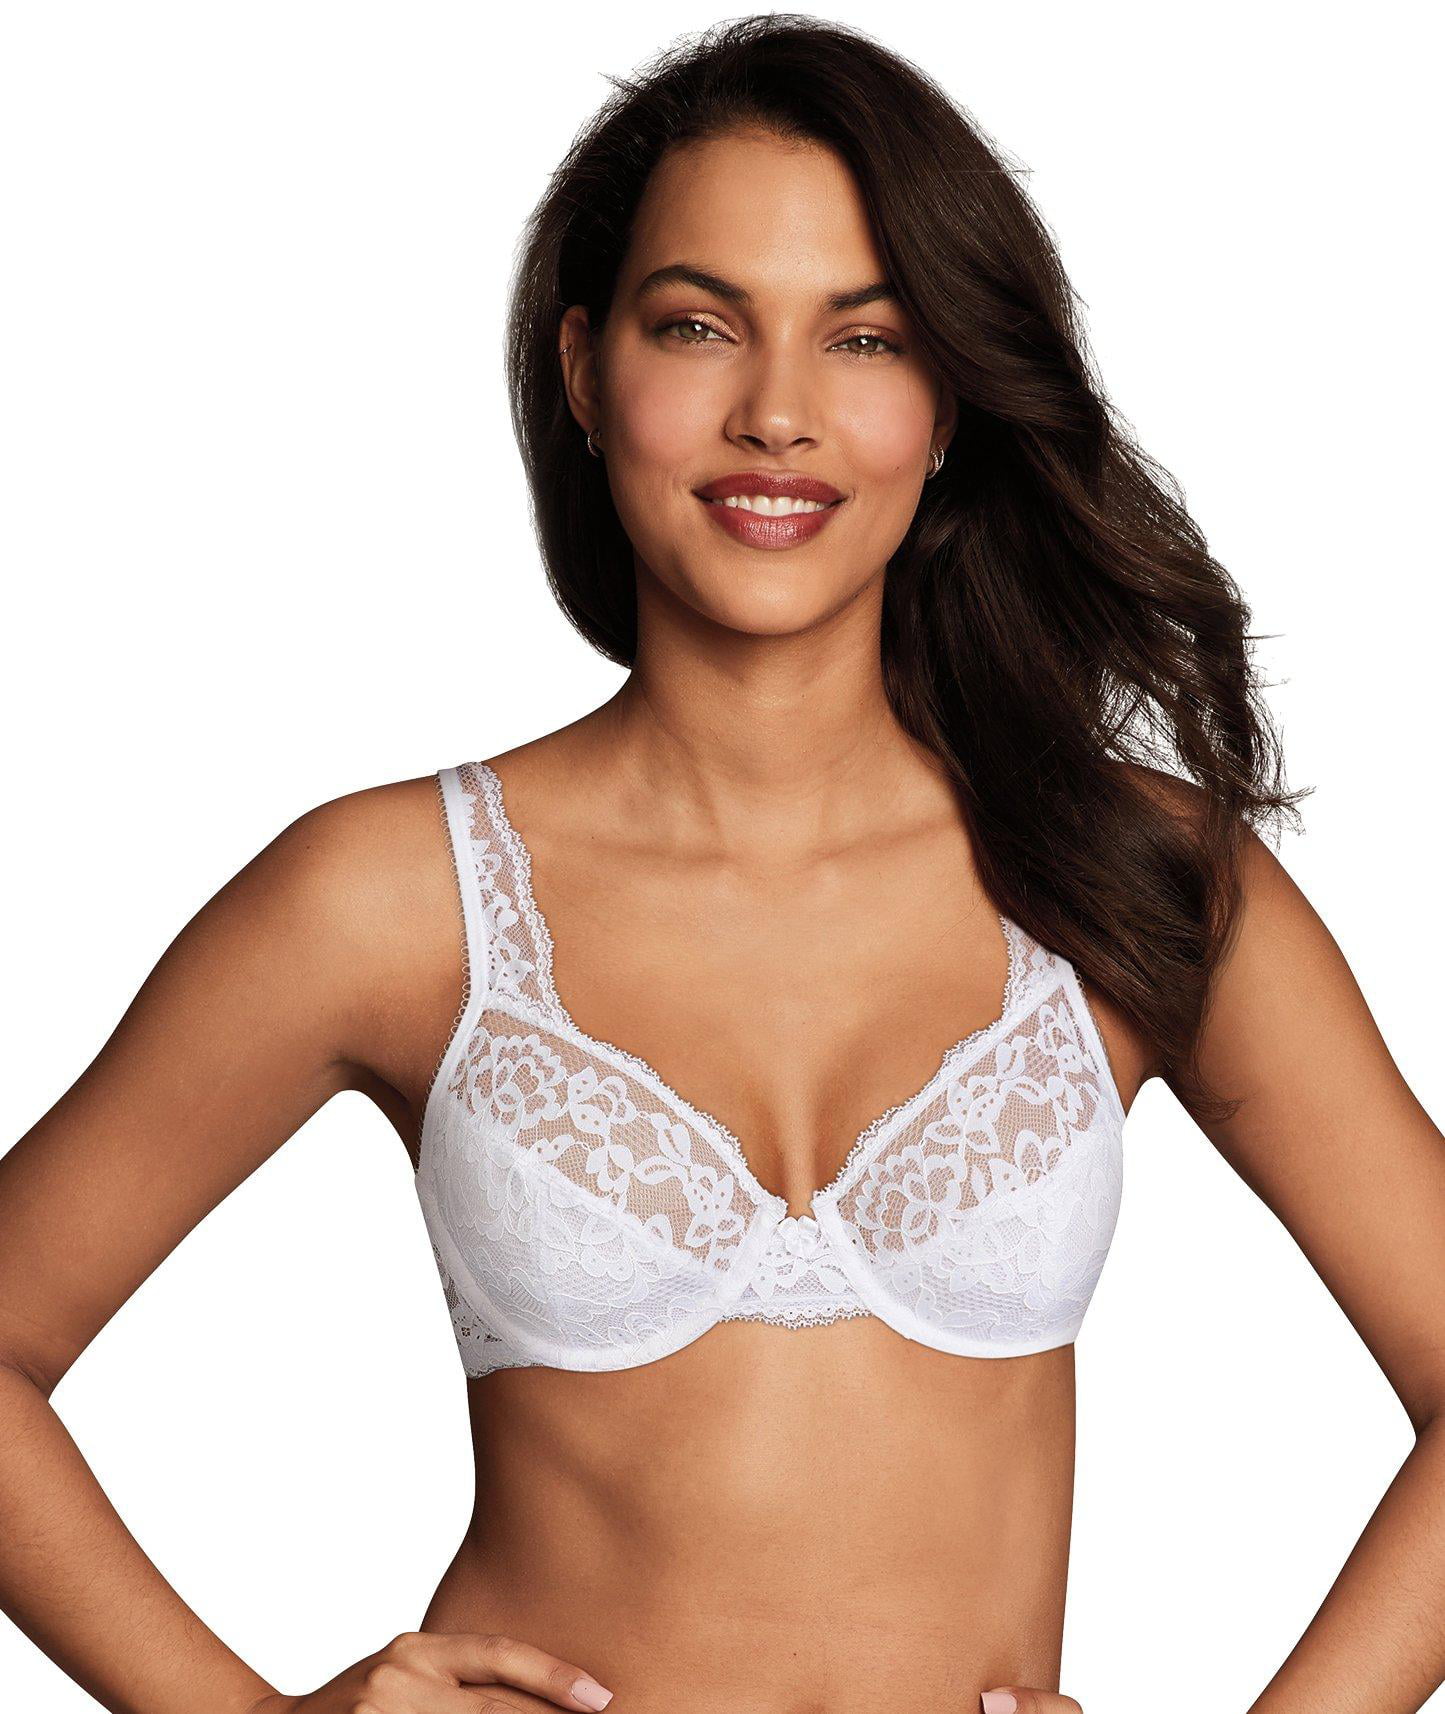 New Maidenform® #9407 Enthralled Lace Plunge Push Up Bra Varied Sizes/ Colors